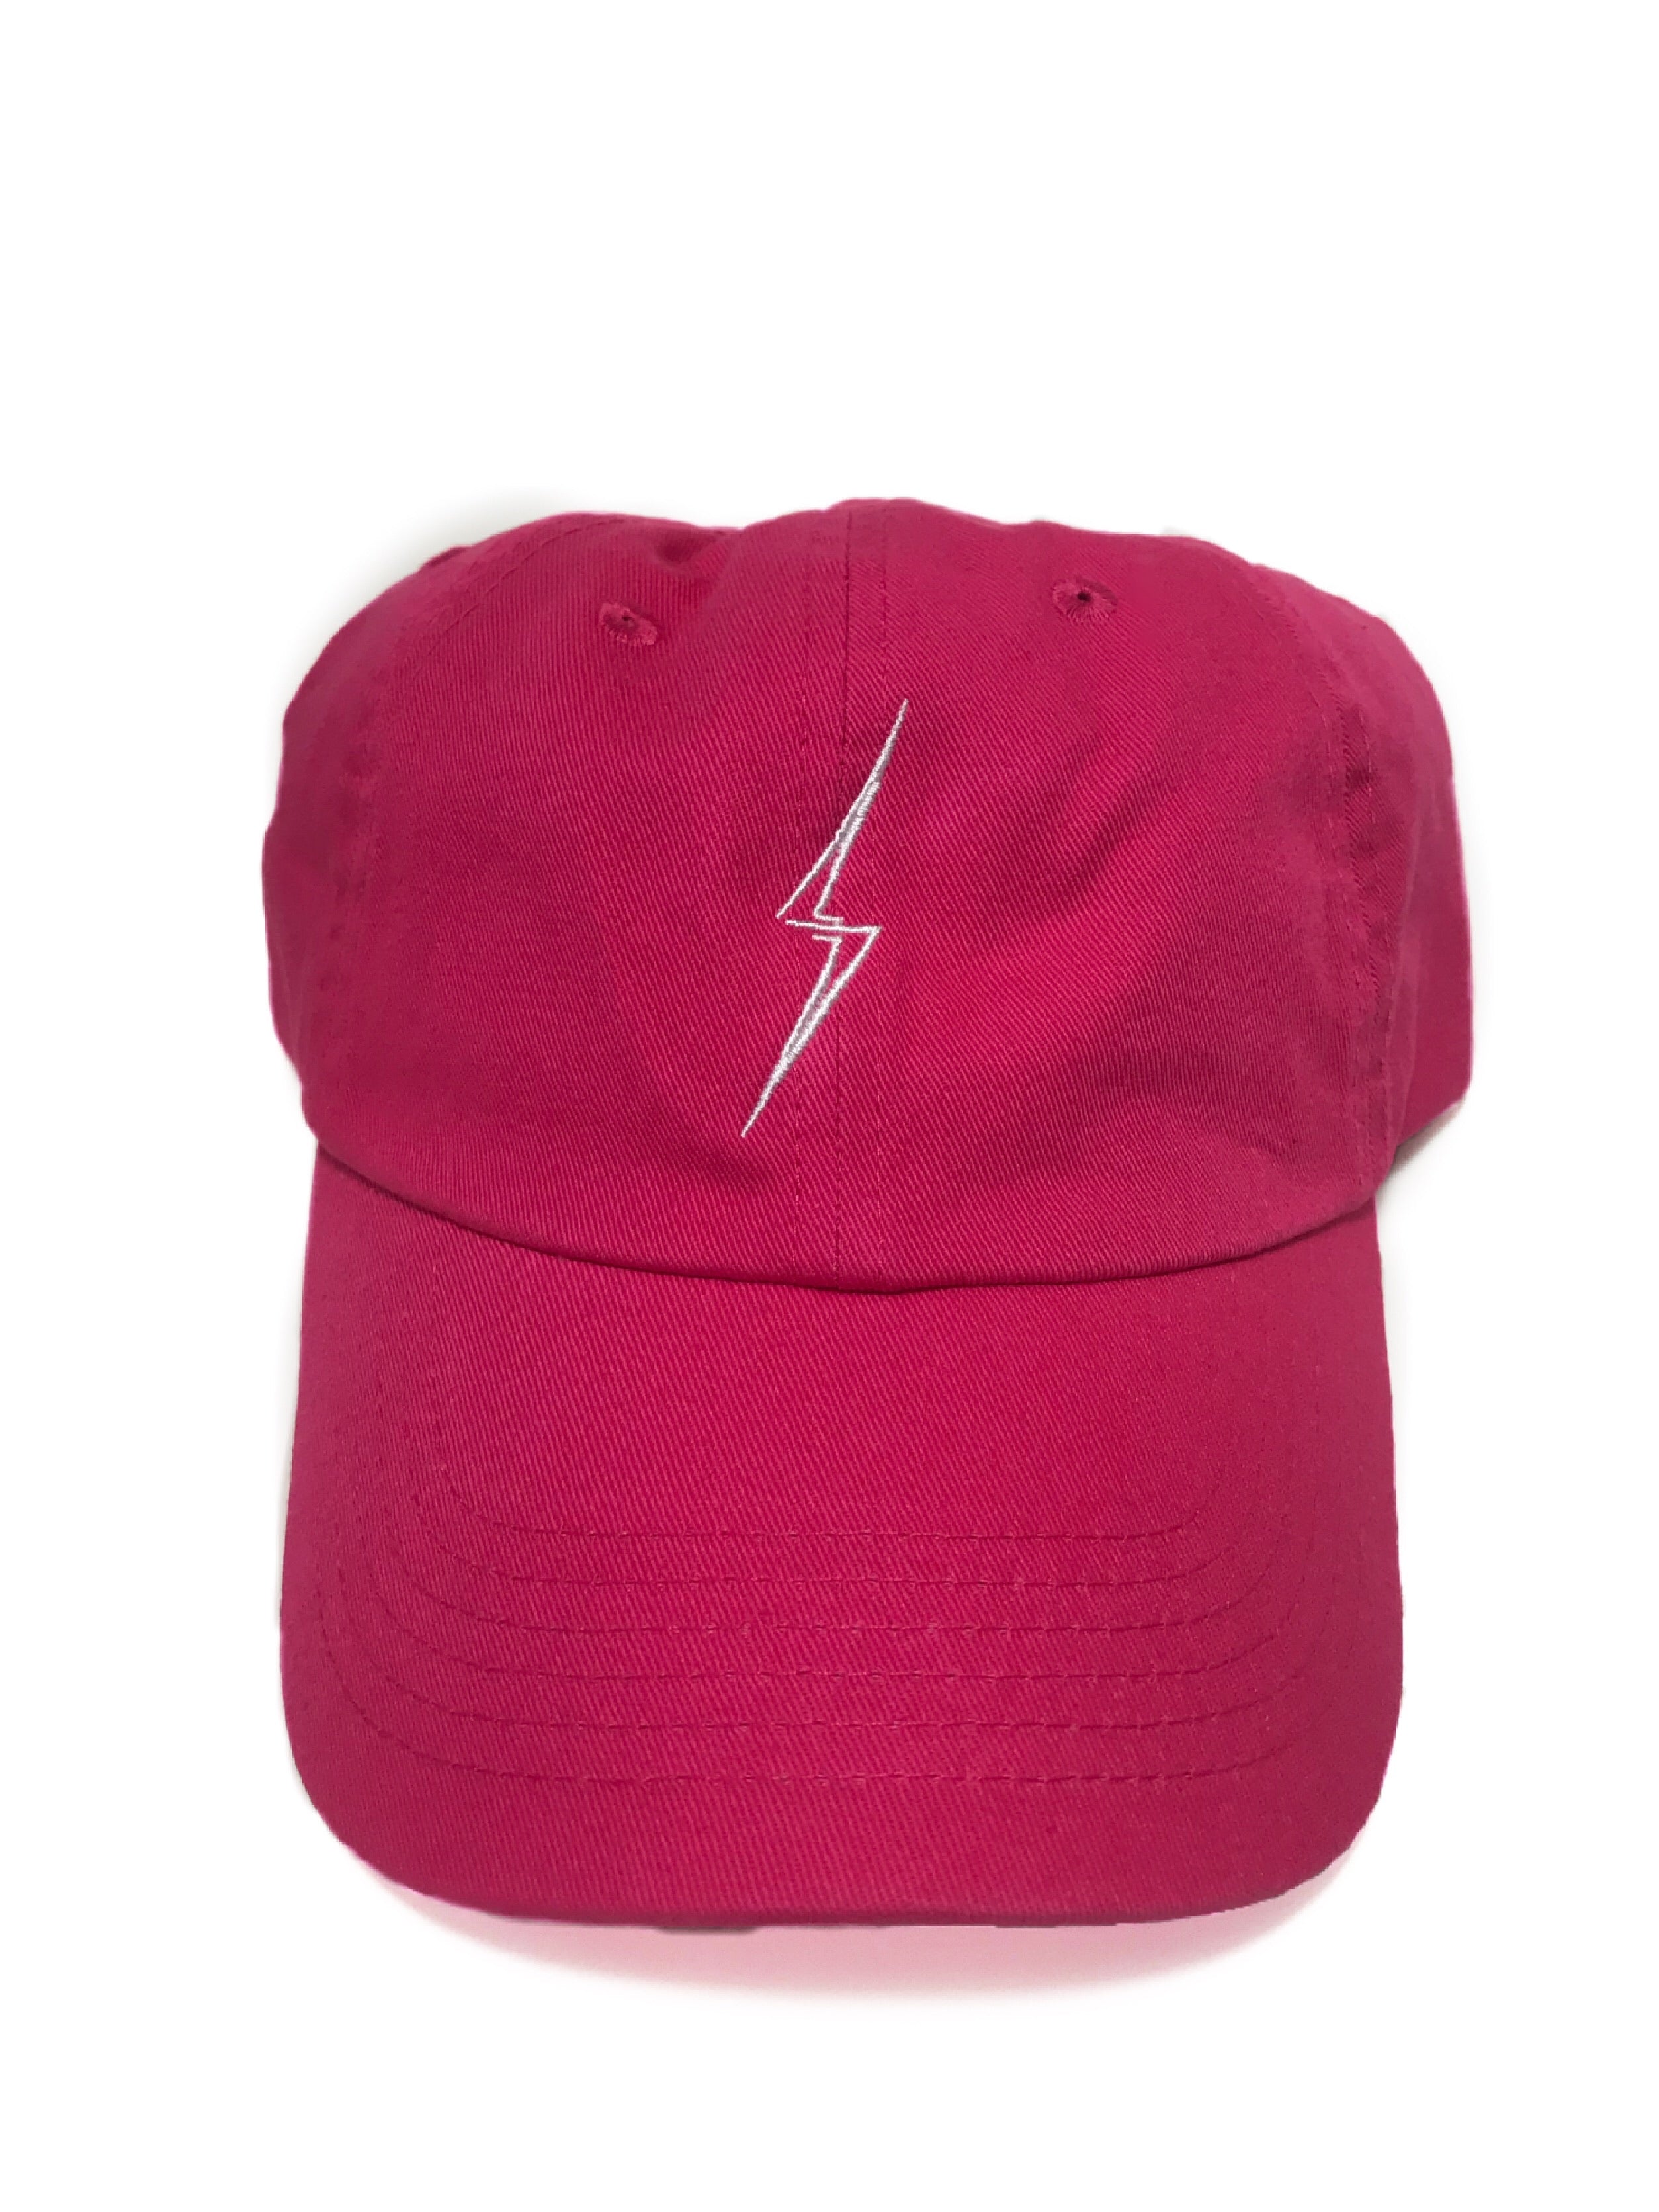 Classic Bolt Dad Hat-Hot Pink/White